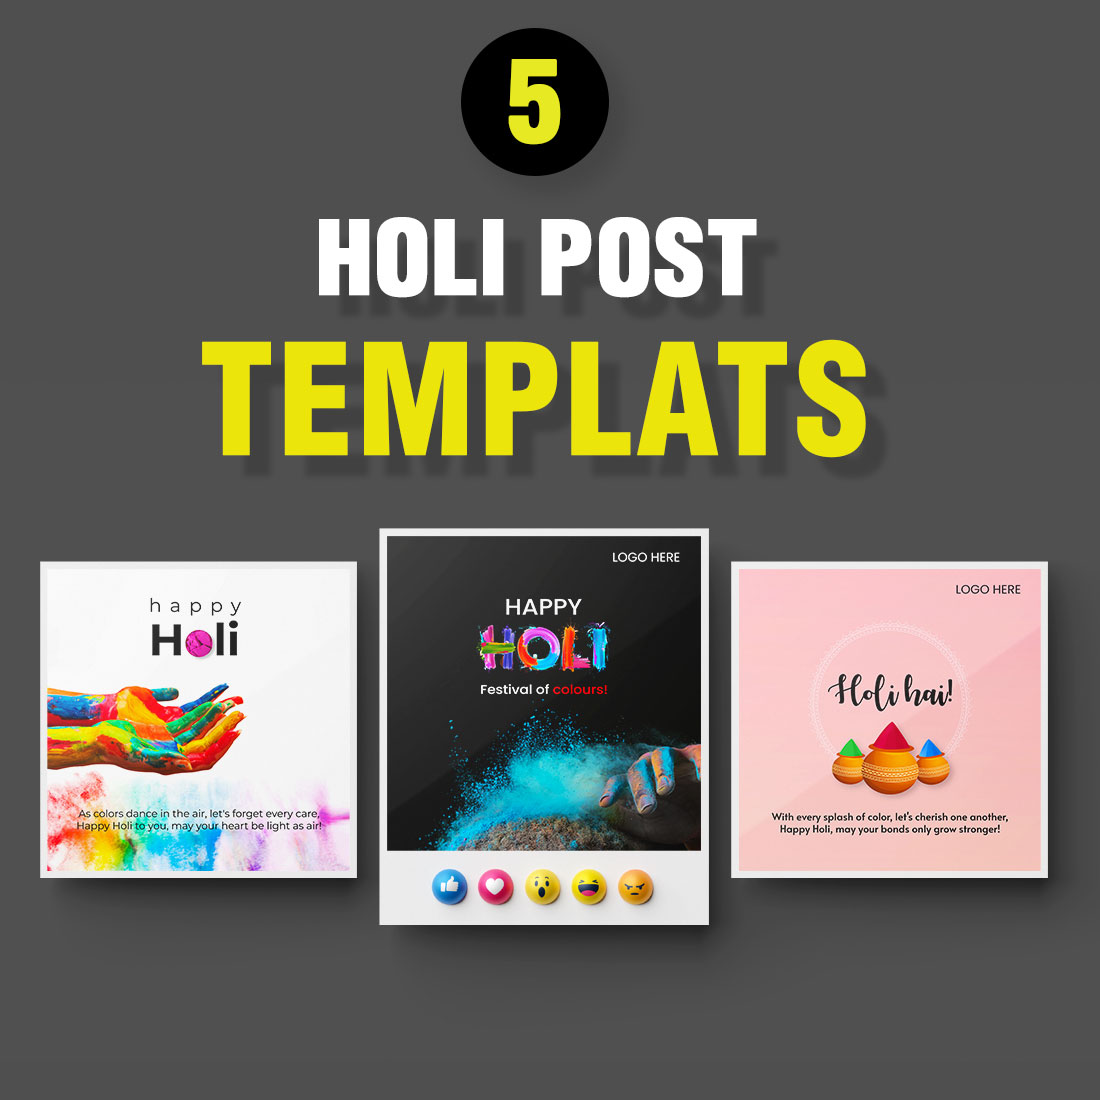 Holi Post Templets cover image.